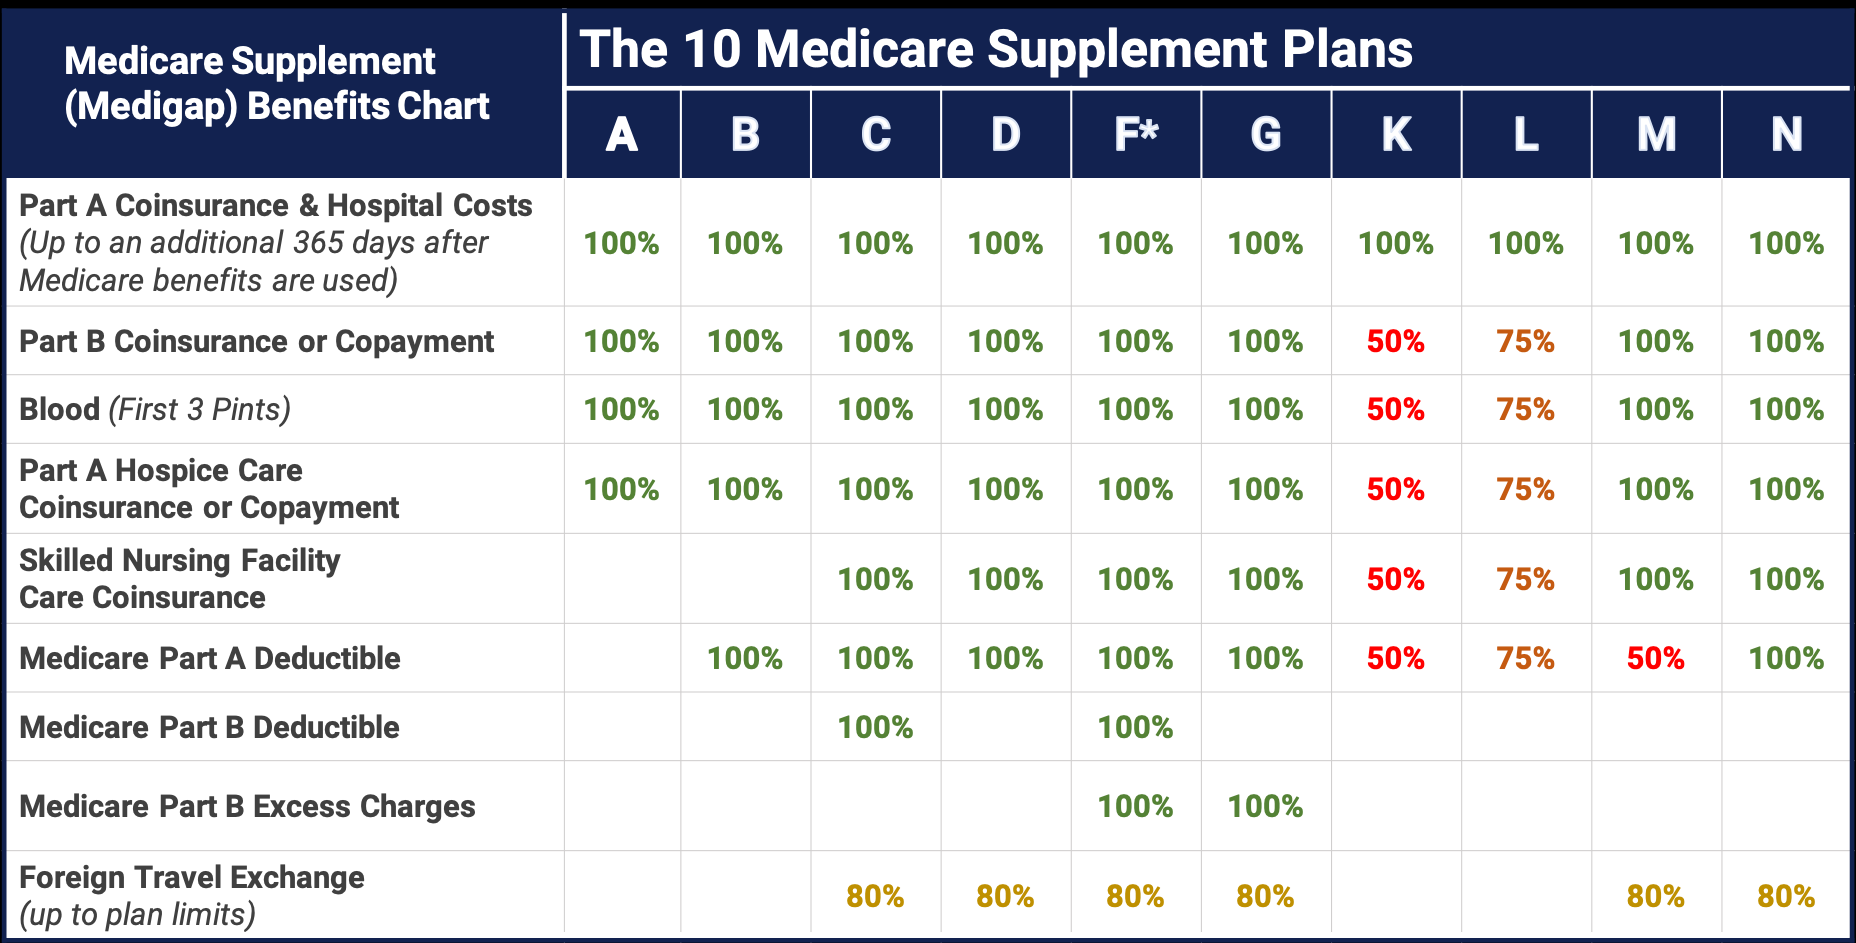 The 10 Medicare Supplement Plan Options